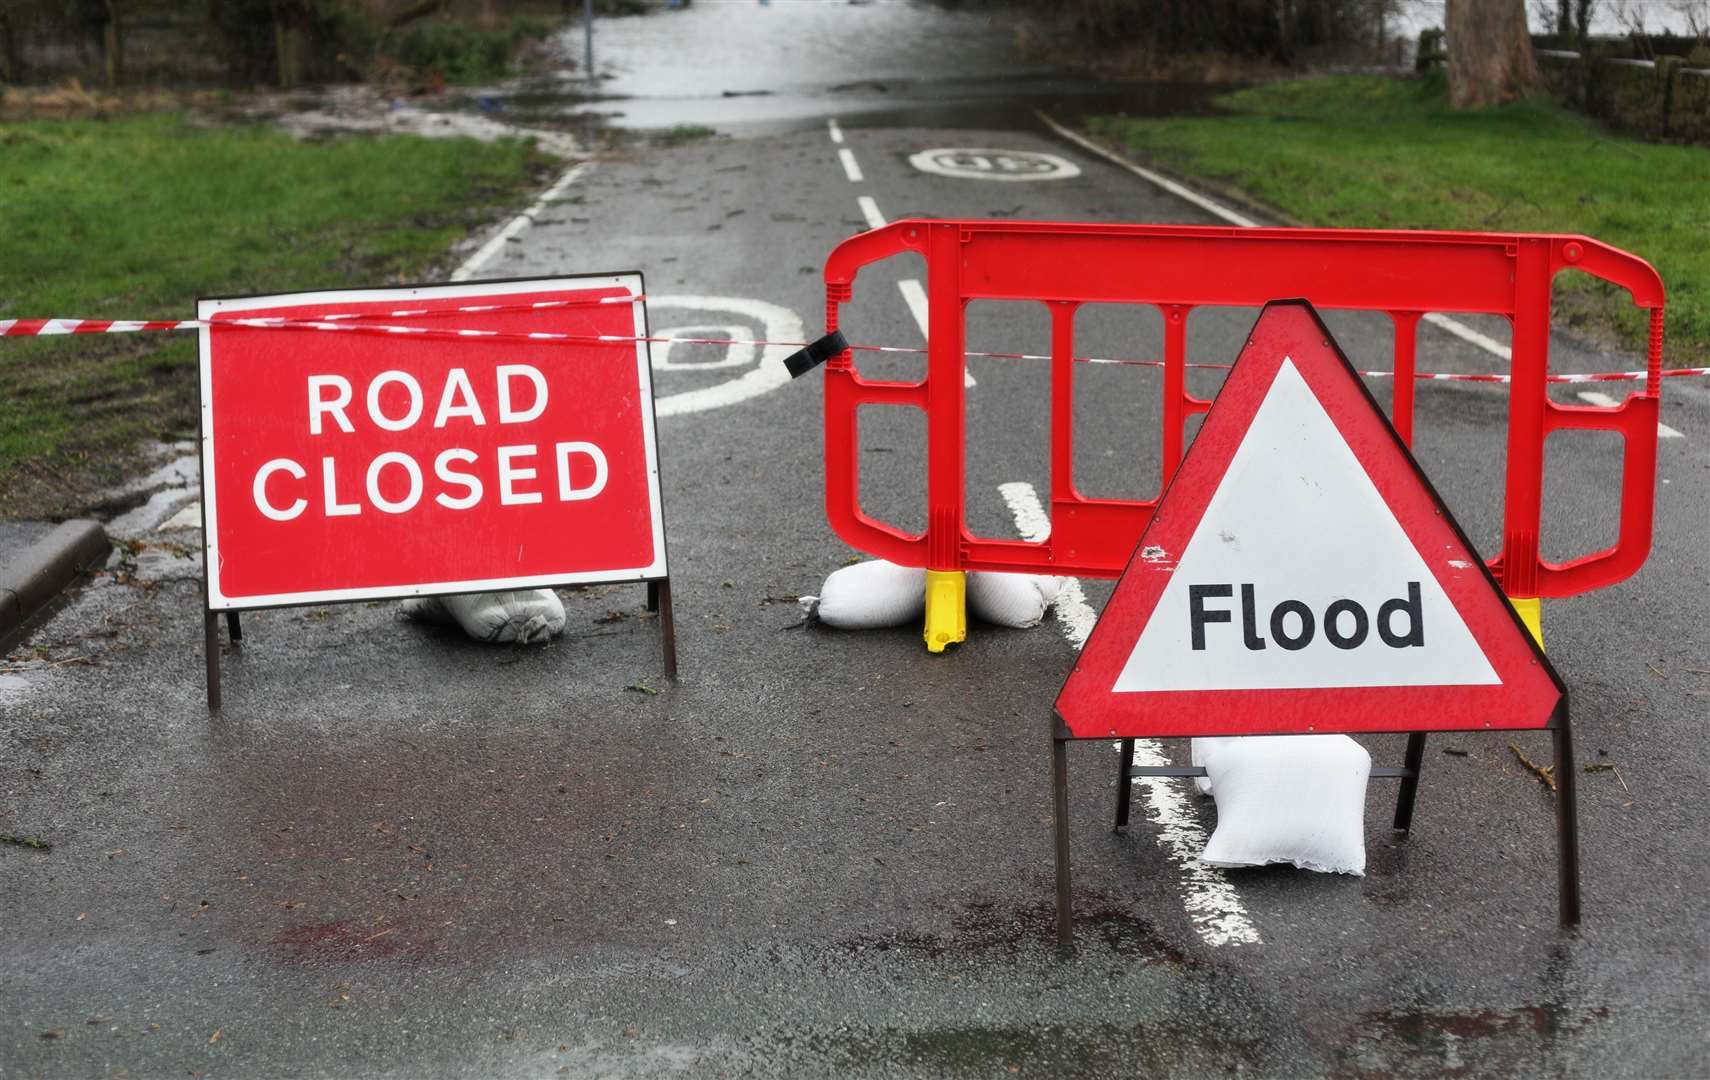 Environment Agency has asked people to avoid low lying areas near Sevenoaks and Edenbridge